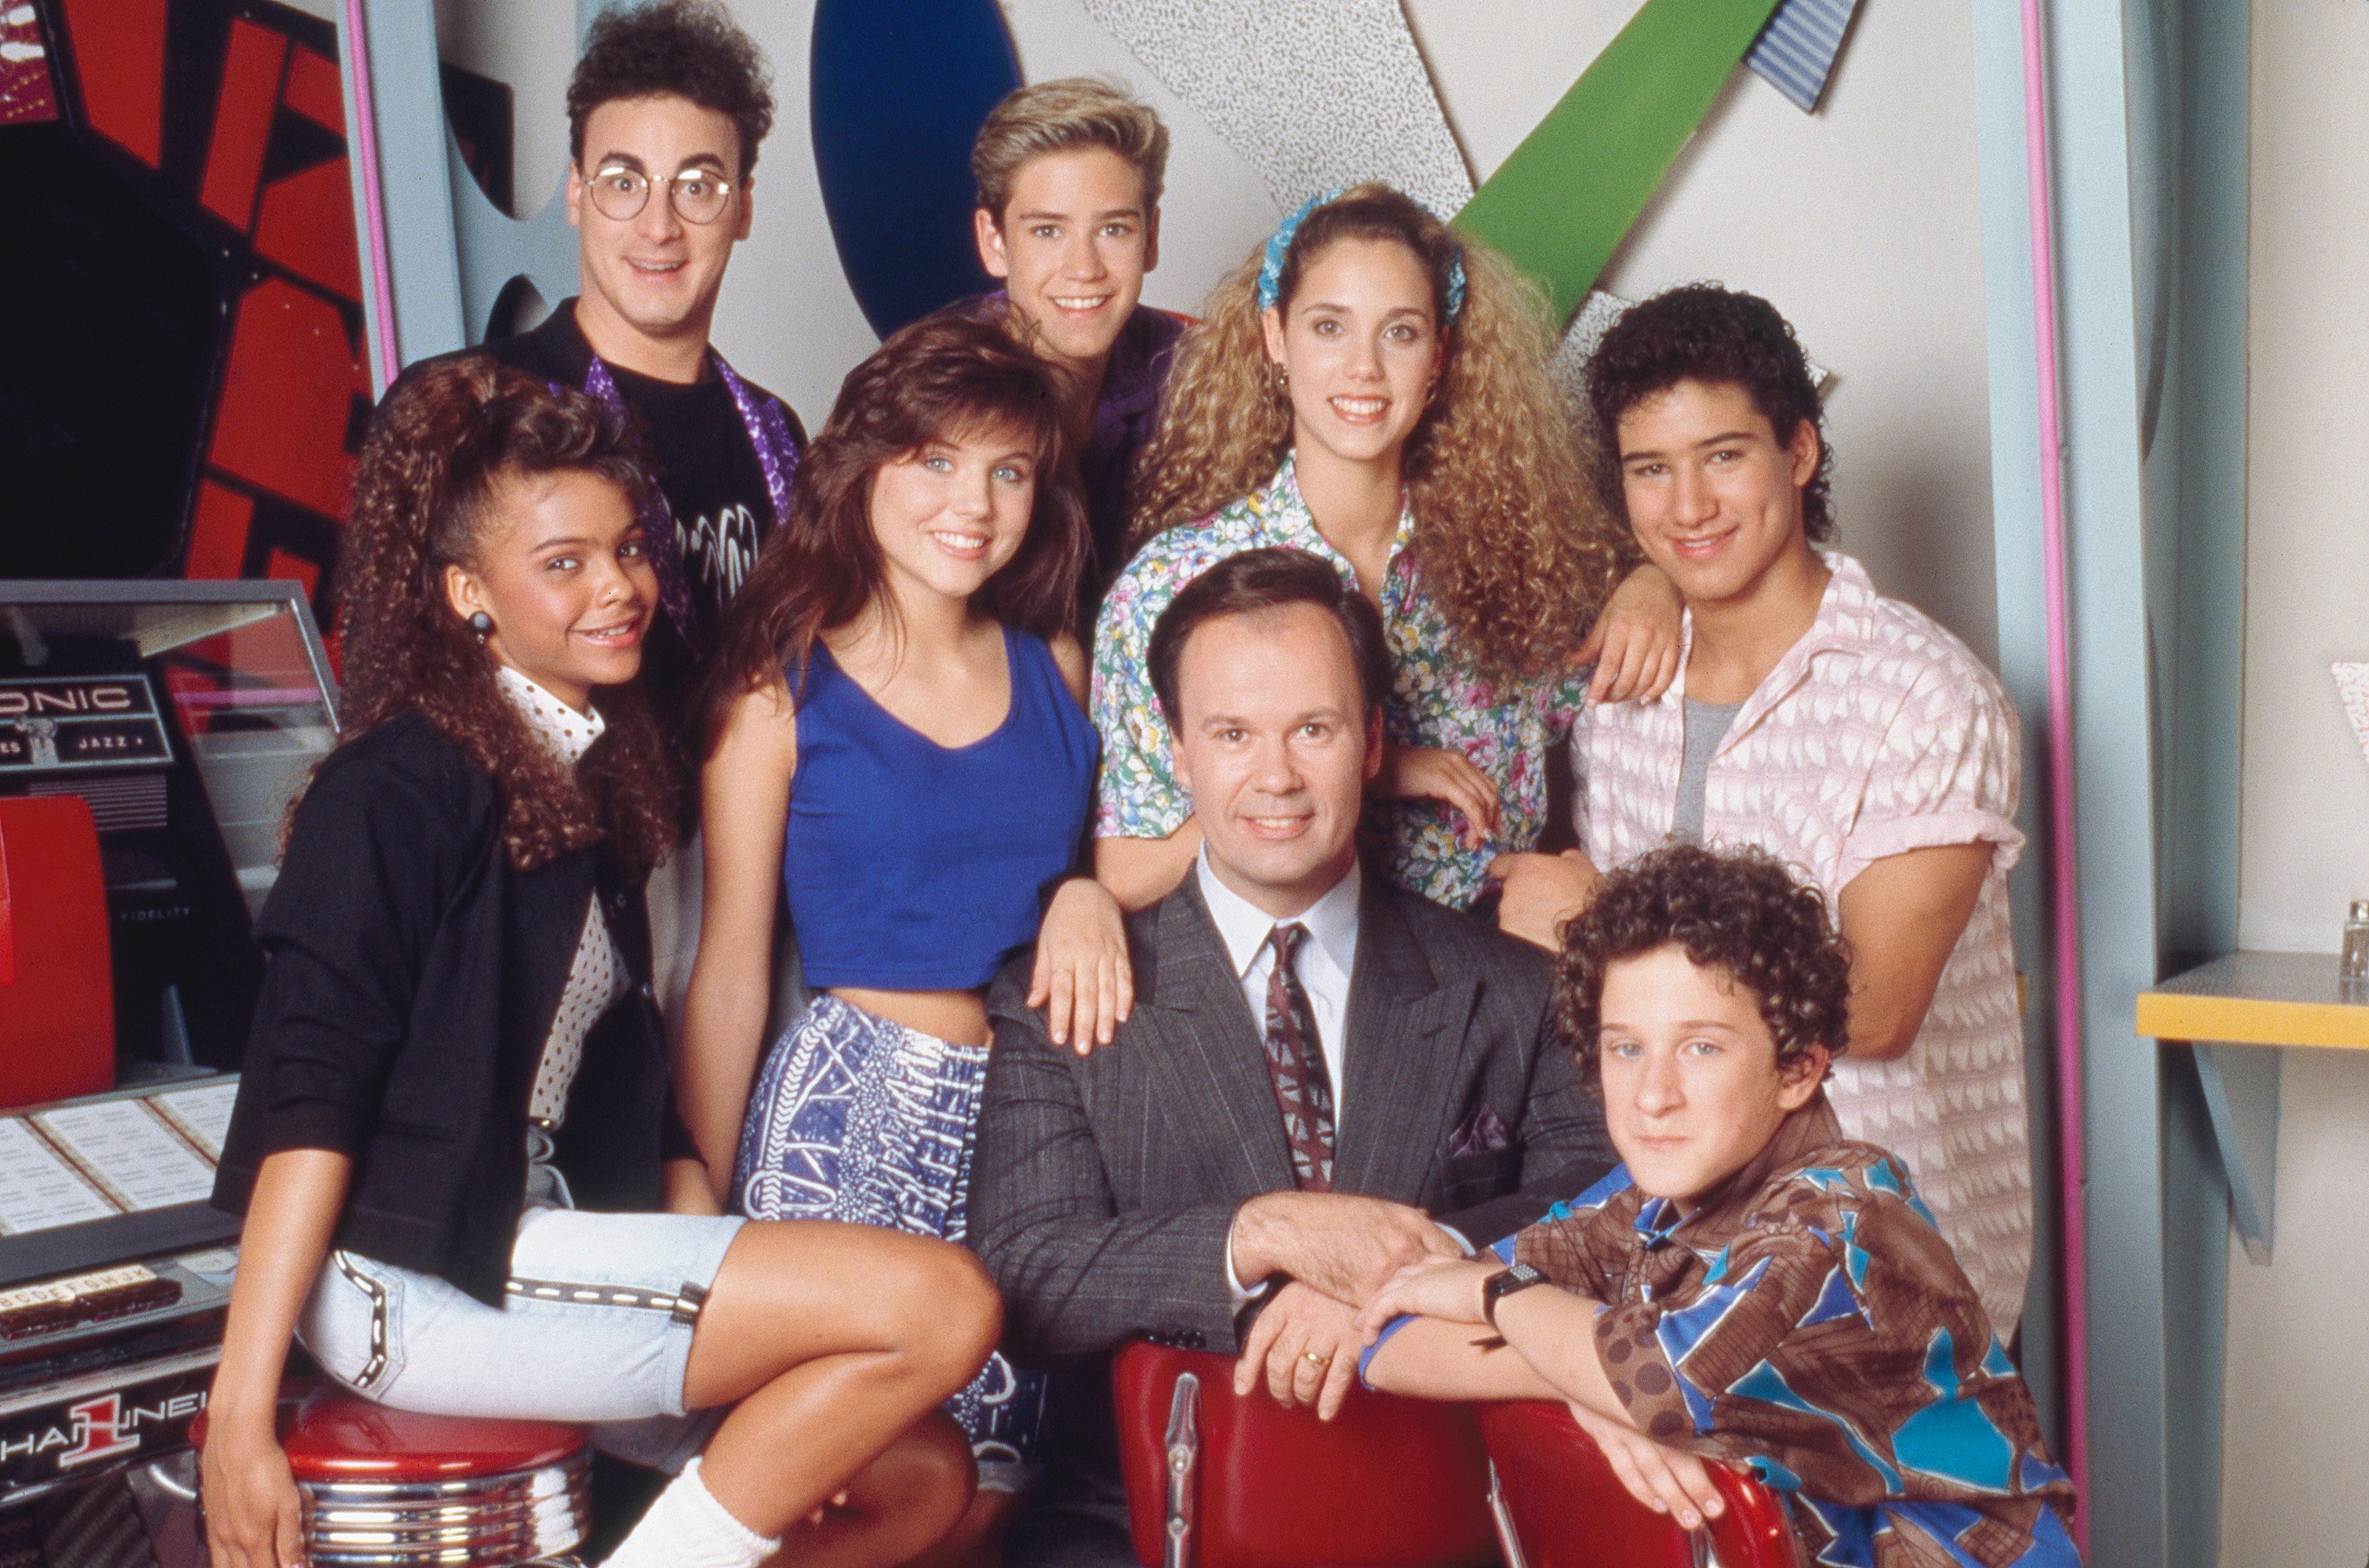 The cast of 'Saved by the Bell'